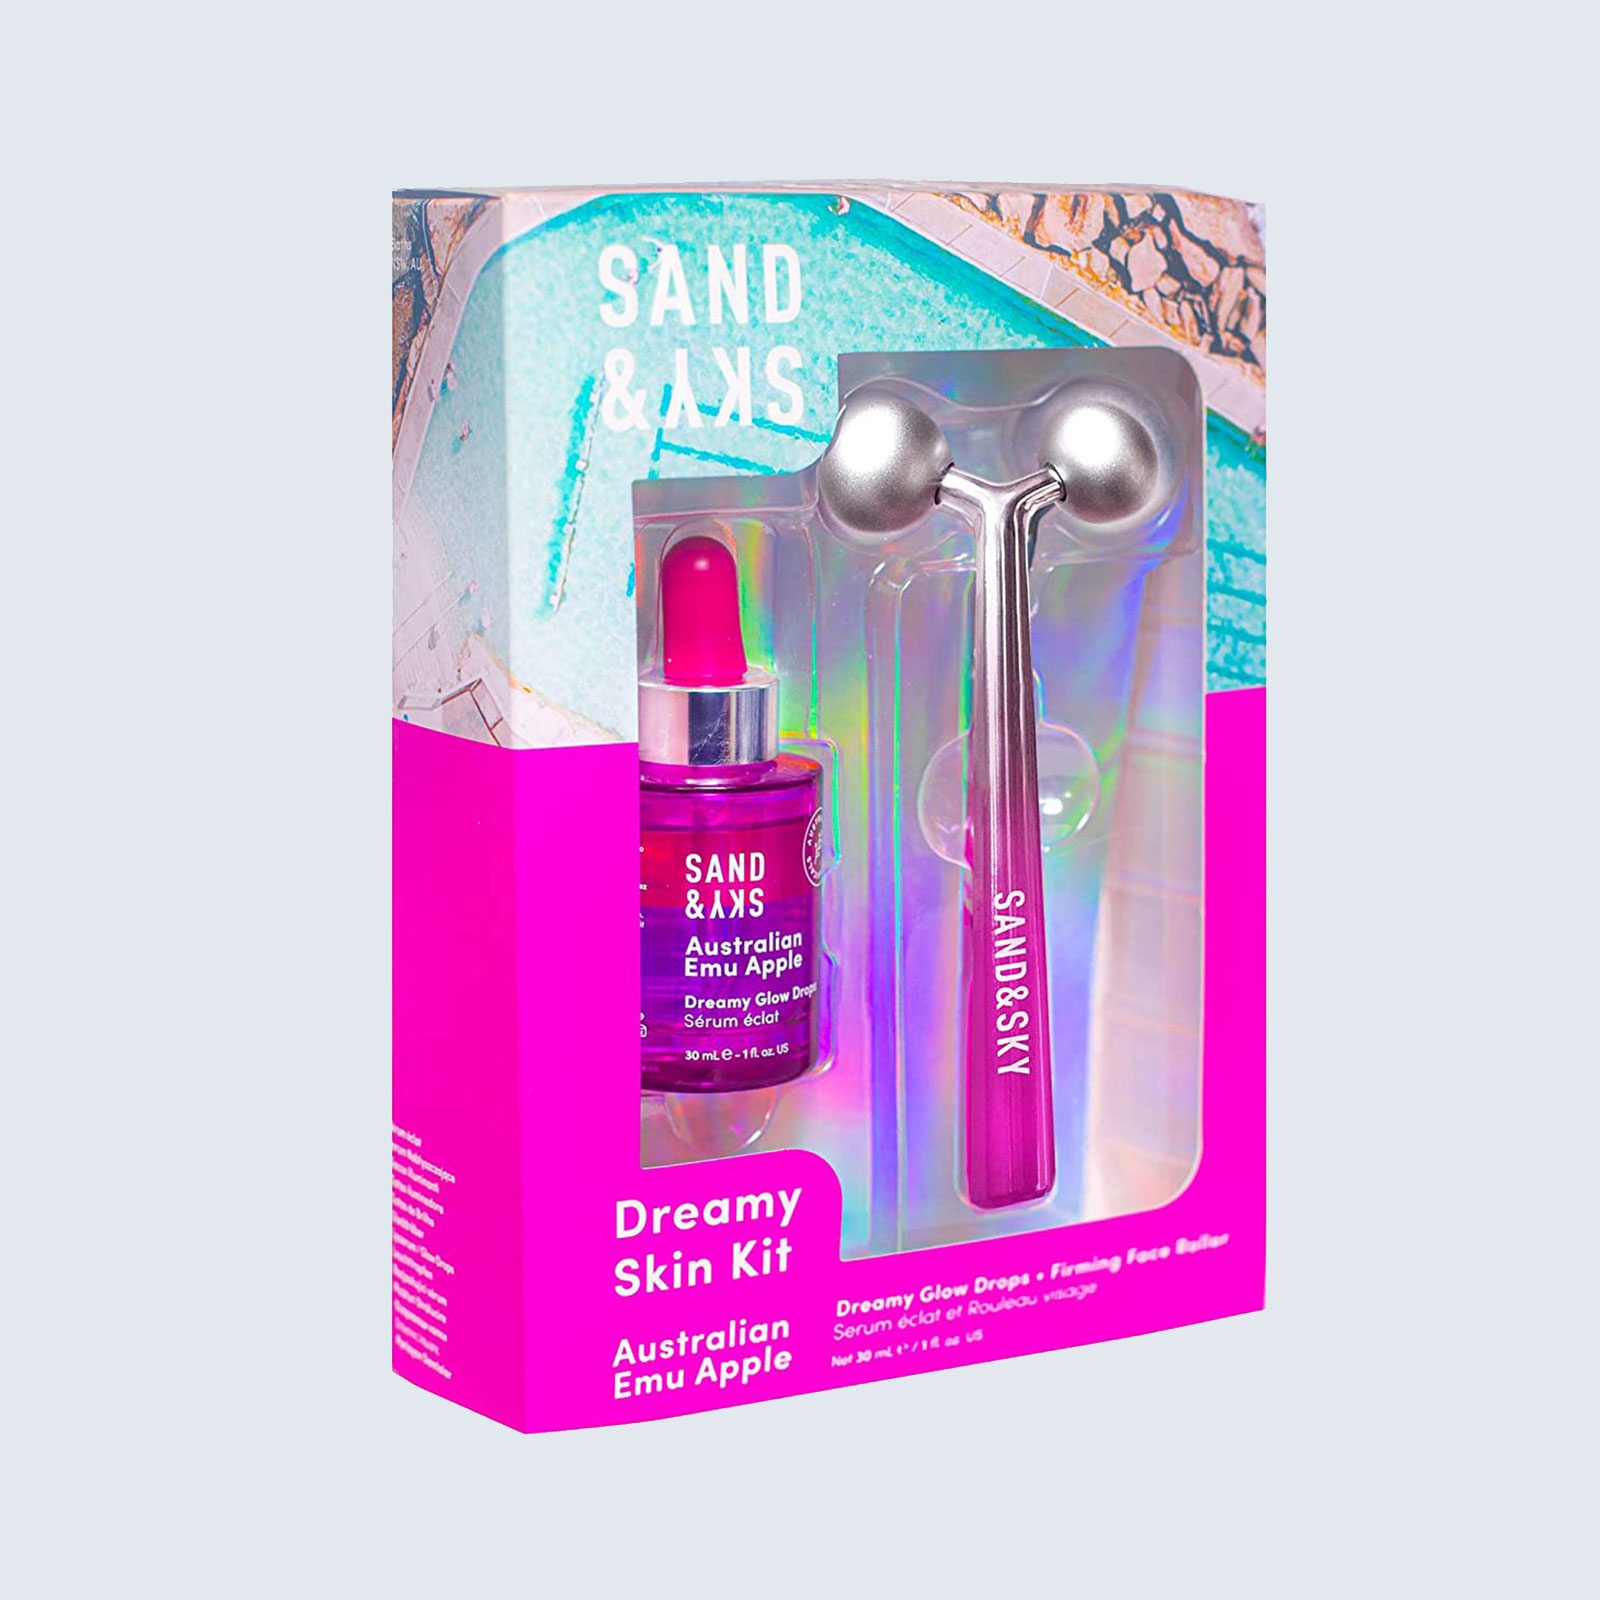 For the mom in need of a getaway: Sand & Sky Dreamy Skin Kit